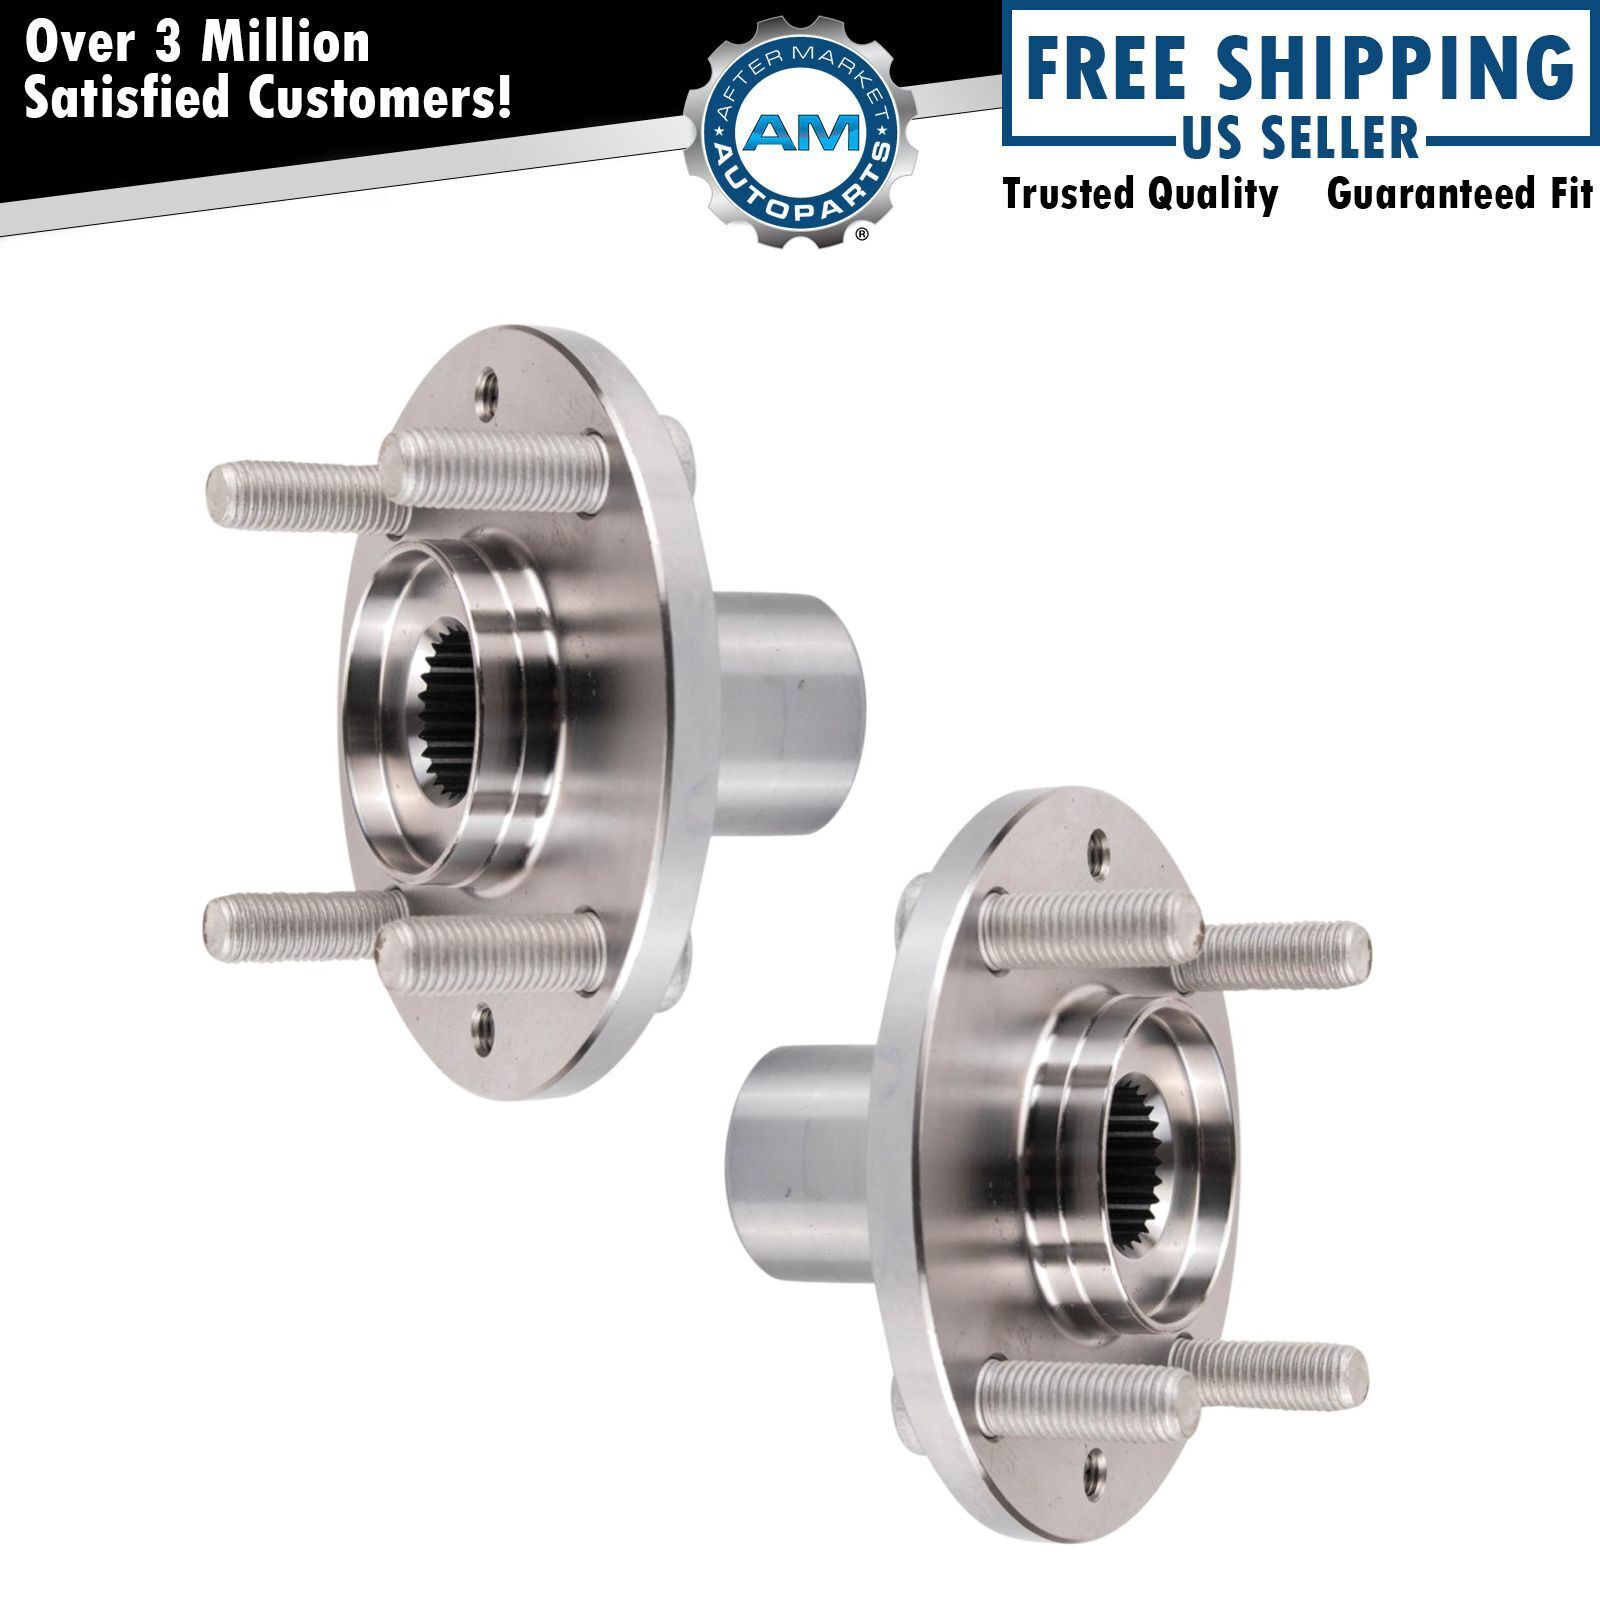 Front Rear Wheel Hub Pair Set for Ford Escort Mazda Protege Mercury Tracer